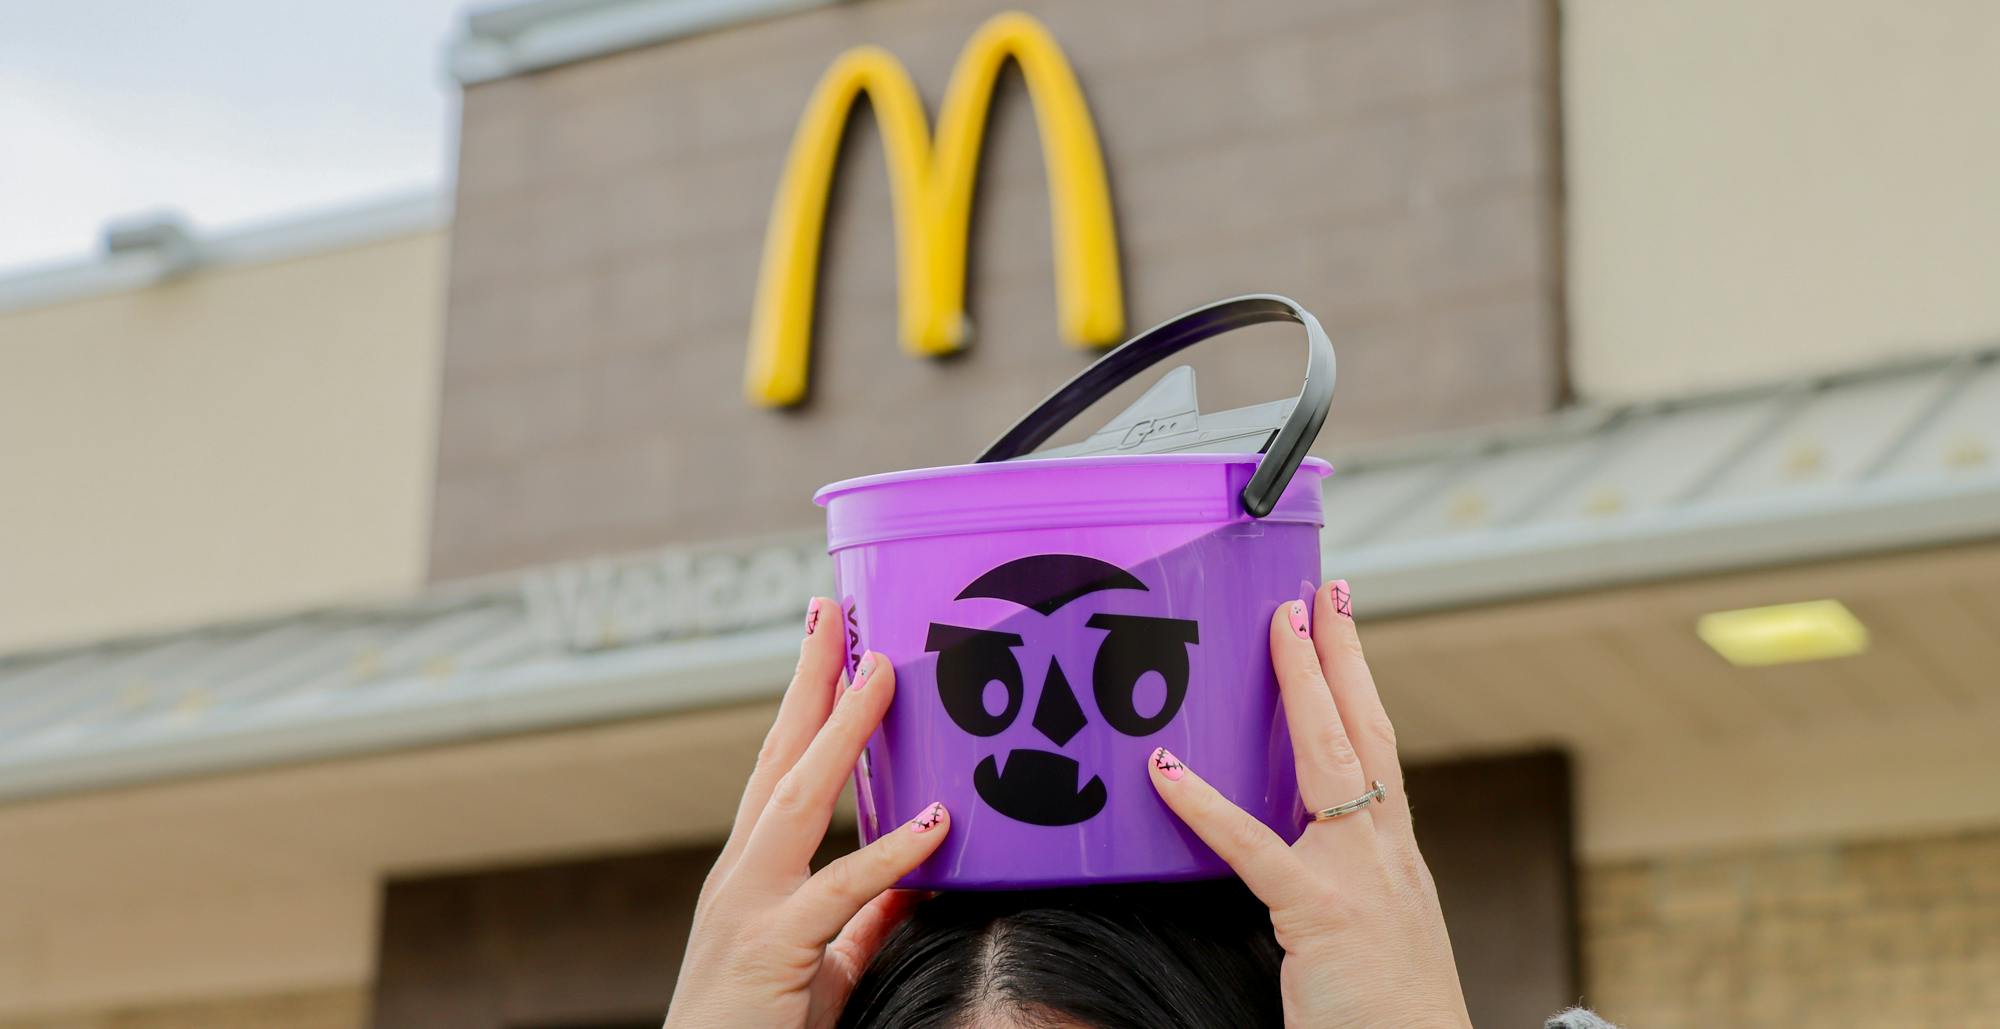 McDonald's Halloween Buckets Are Back With 4 New Designs